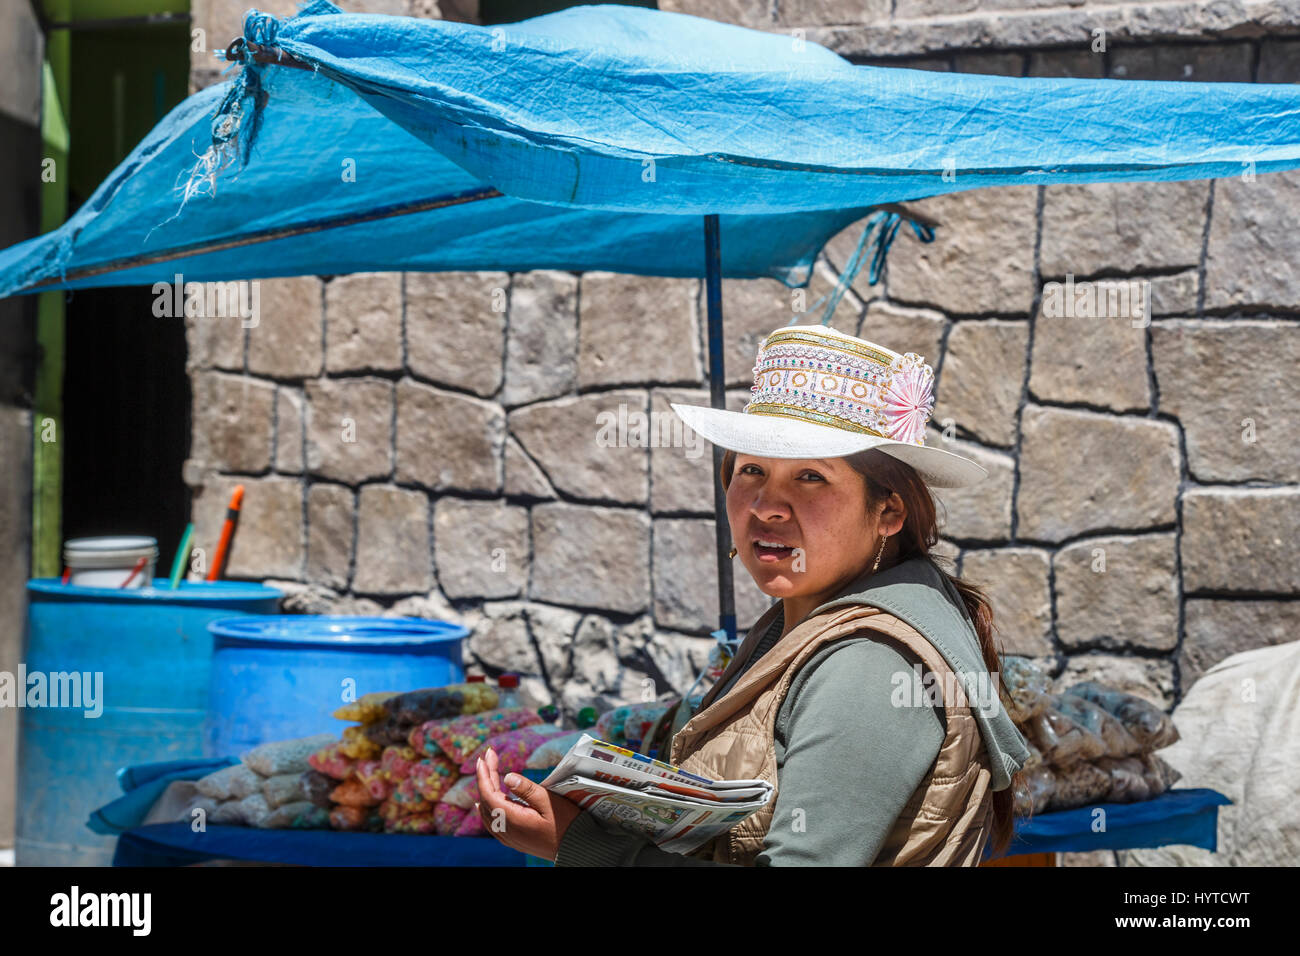 Local woman in traditional pink embroidered hat with rosette, Chivay, a town in the Colca valley, capital of Caylloma province, Arequipa region, Peru Stock Photo